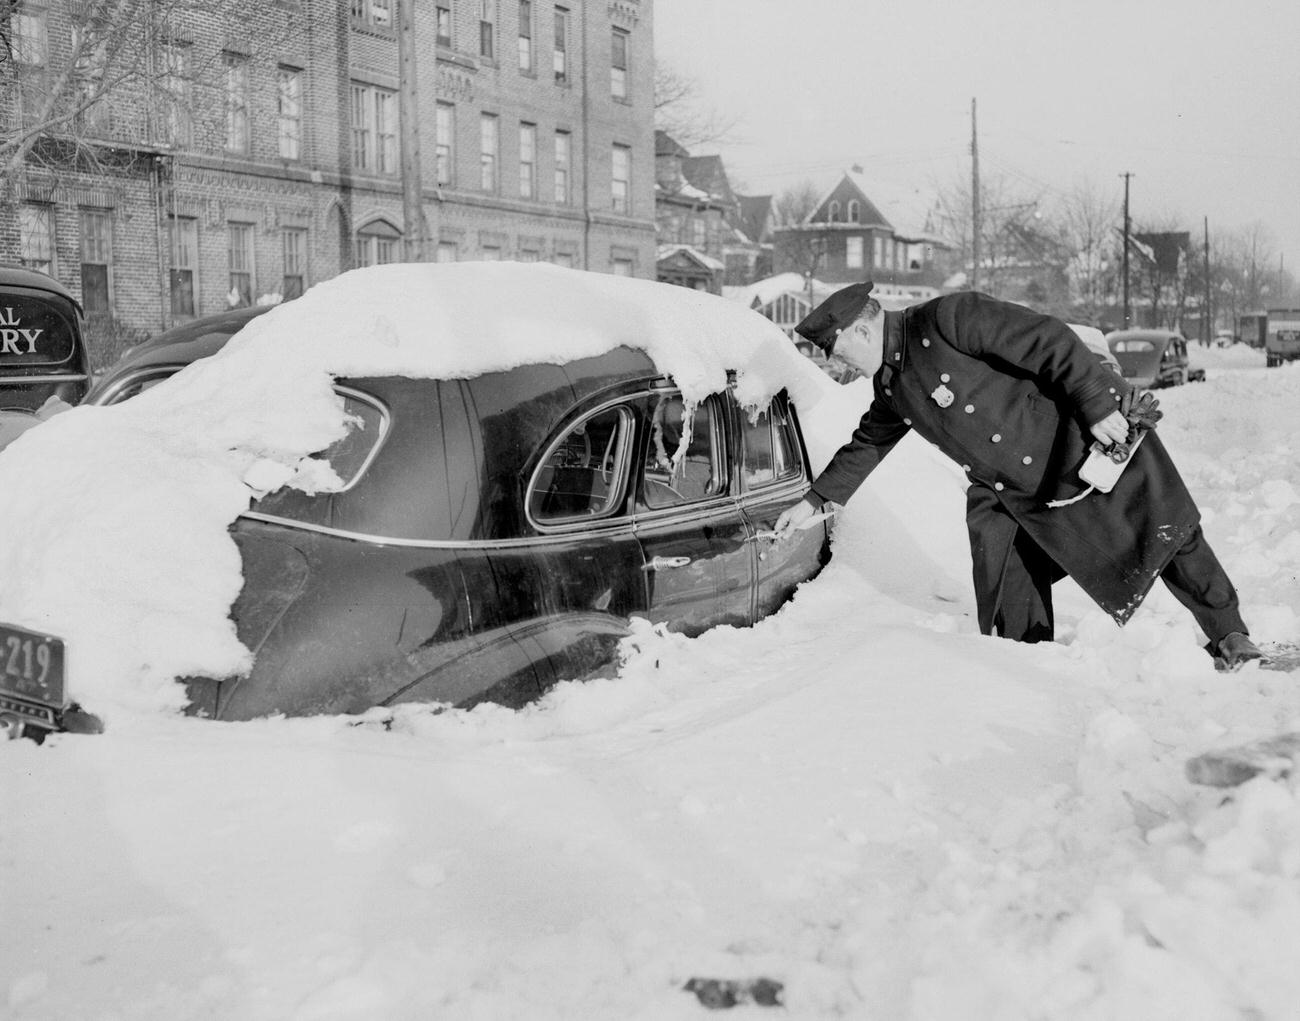 Patrolman James Mcgill Tags Auto Parked At Avenue H And Flatbush Ave., Brooklyn, 1940S. Motorists Were Warned To Keep Their Cars Off Streets And Thereby Facilitate Removal Of Snow.